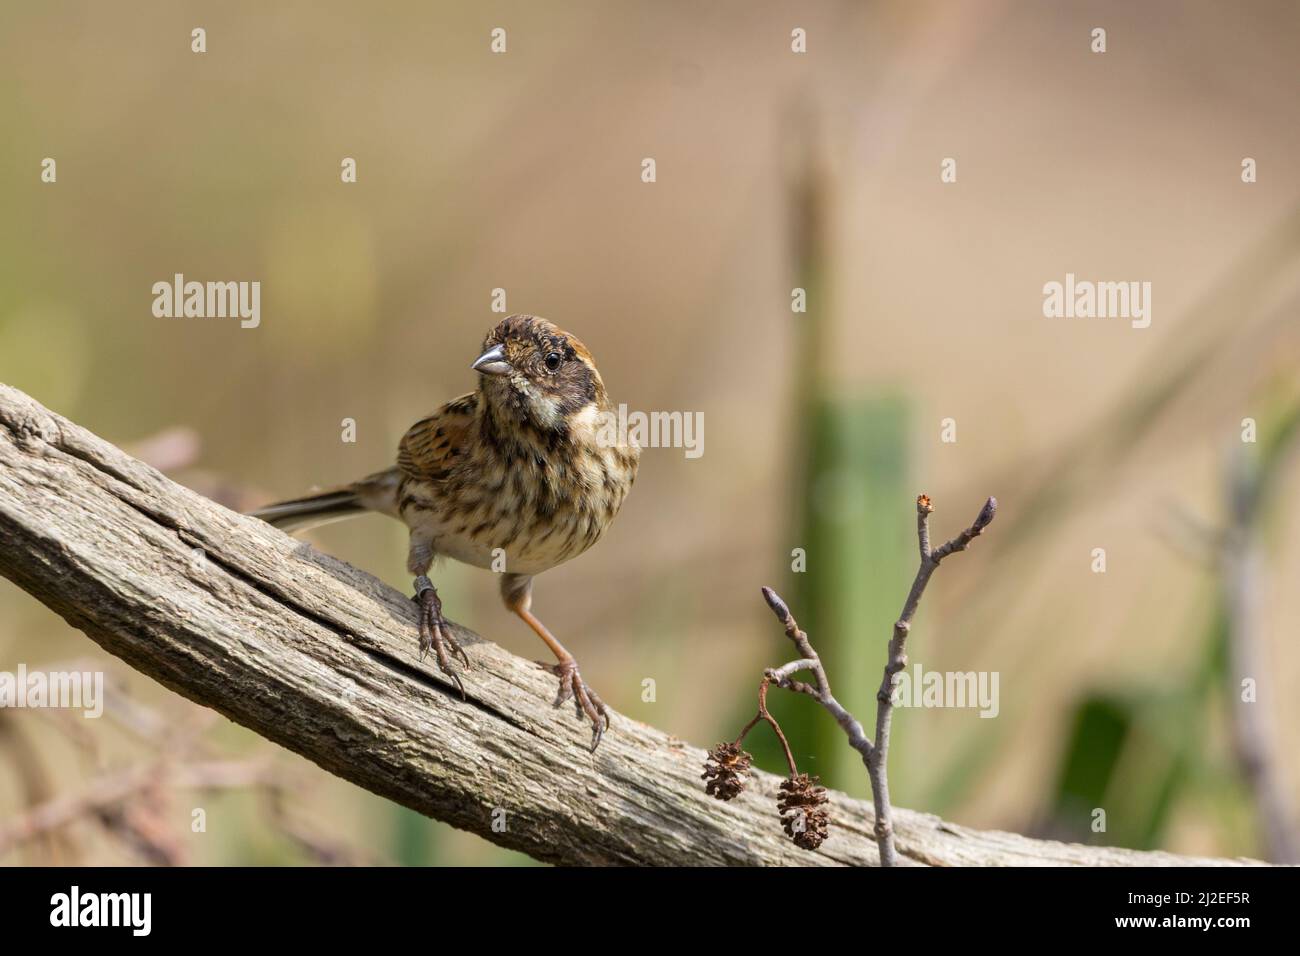 Reed bunting (Emberiza schoeniclus) Streaky brown plumage dark head white moustachial stripes perched on dead branch spring season copy space Stock Photo